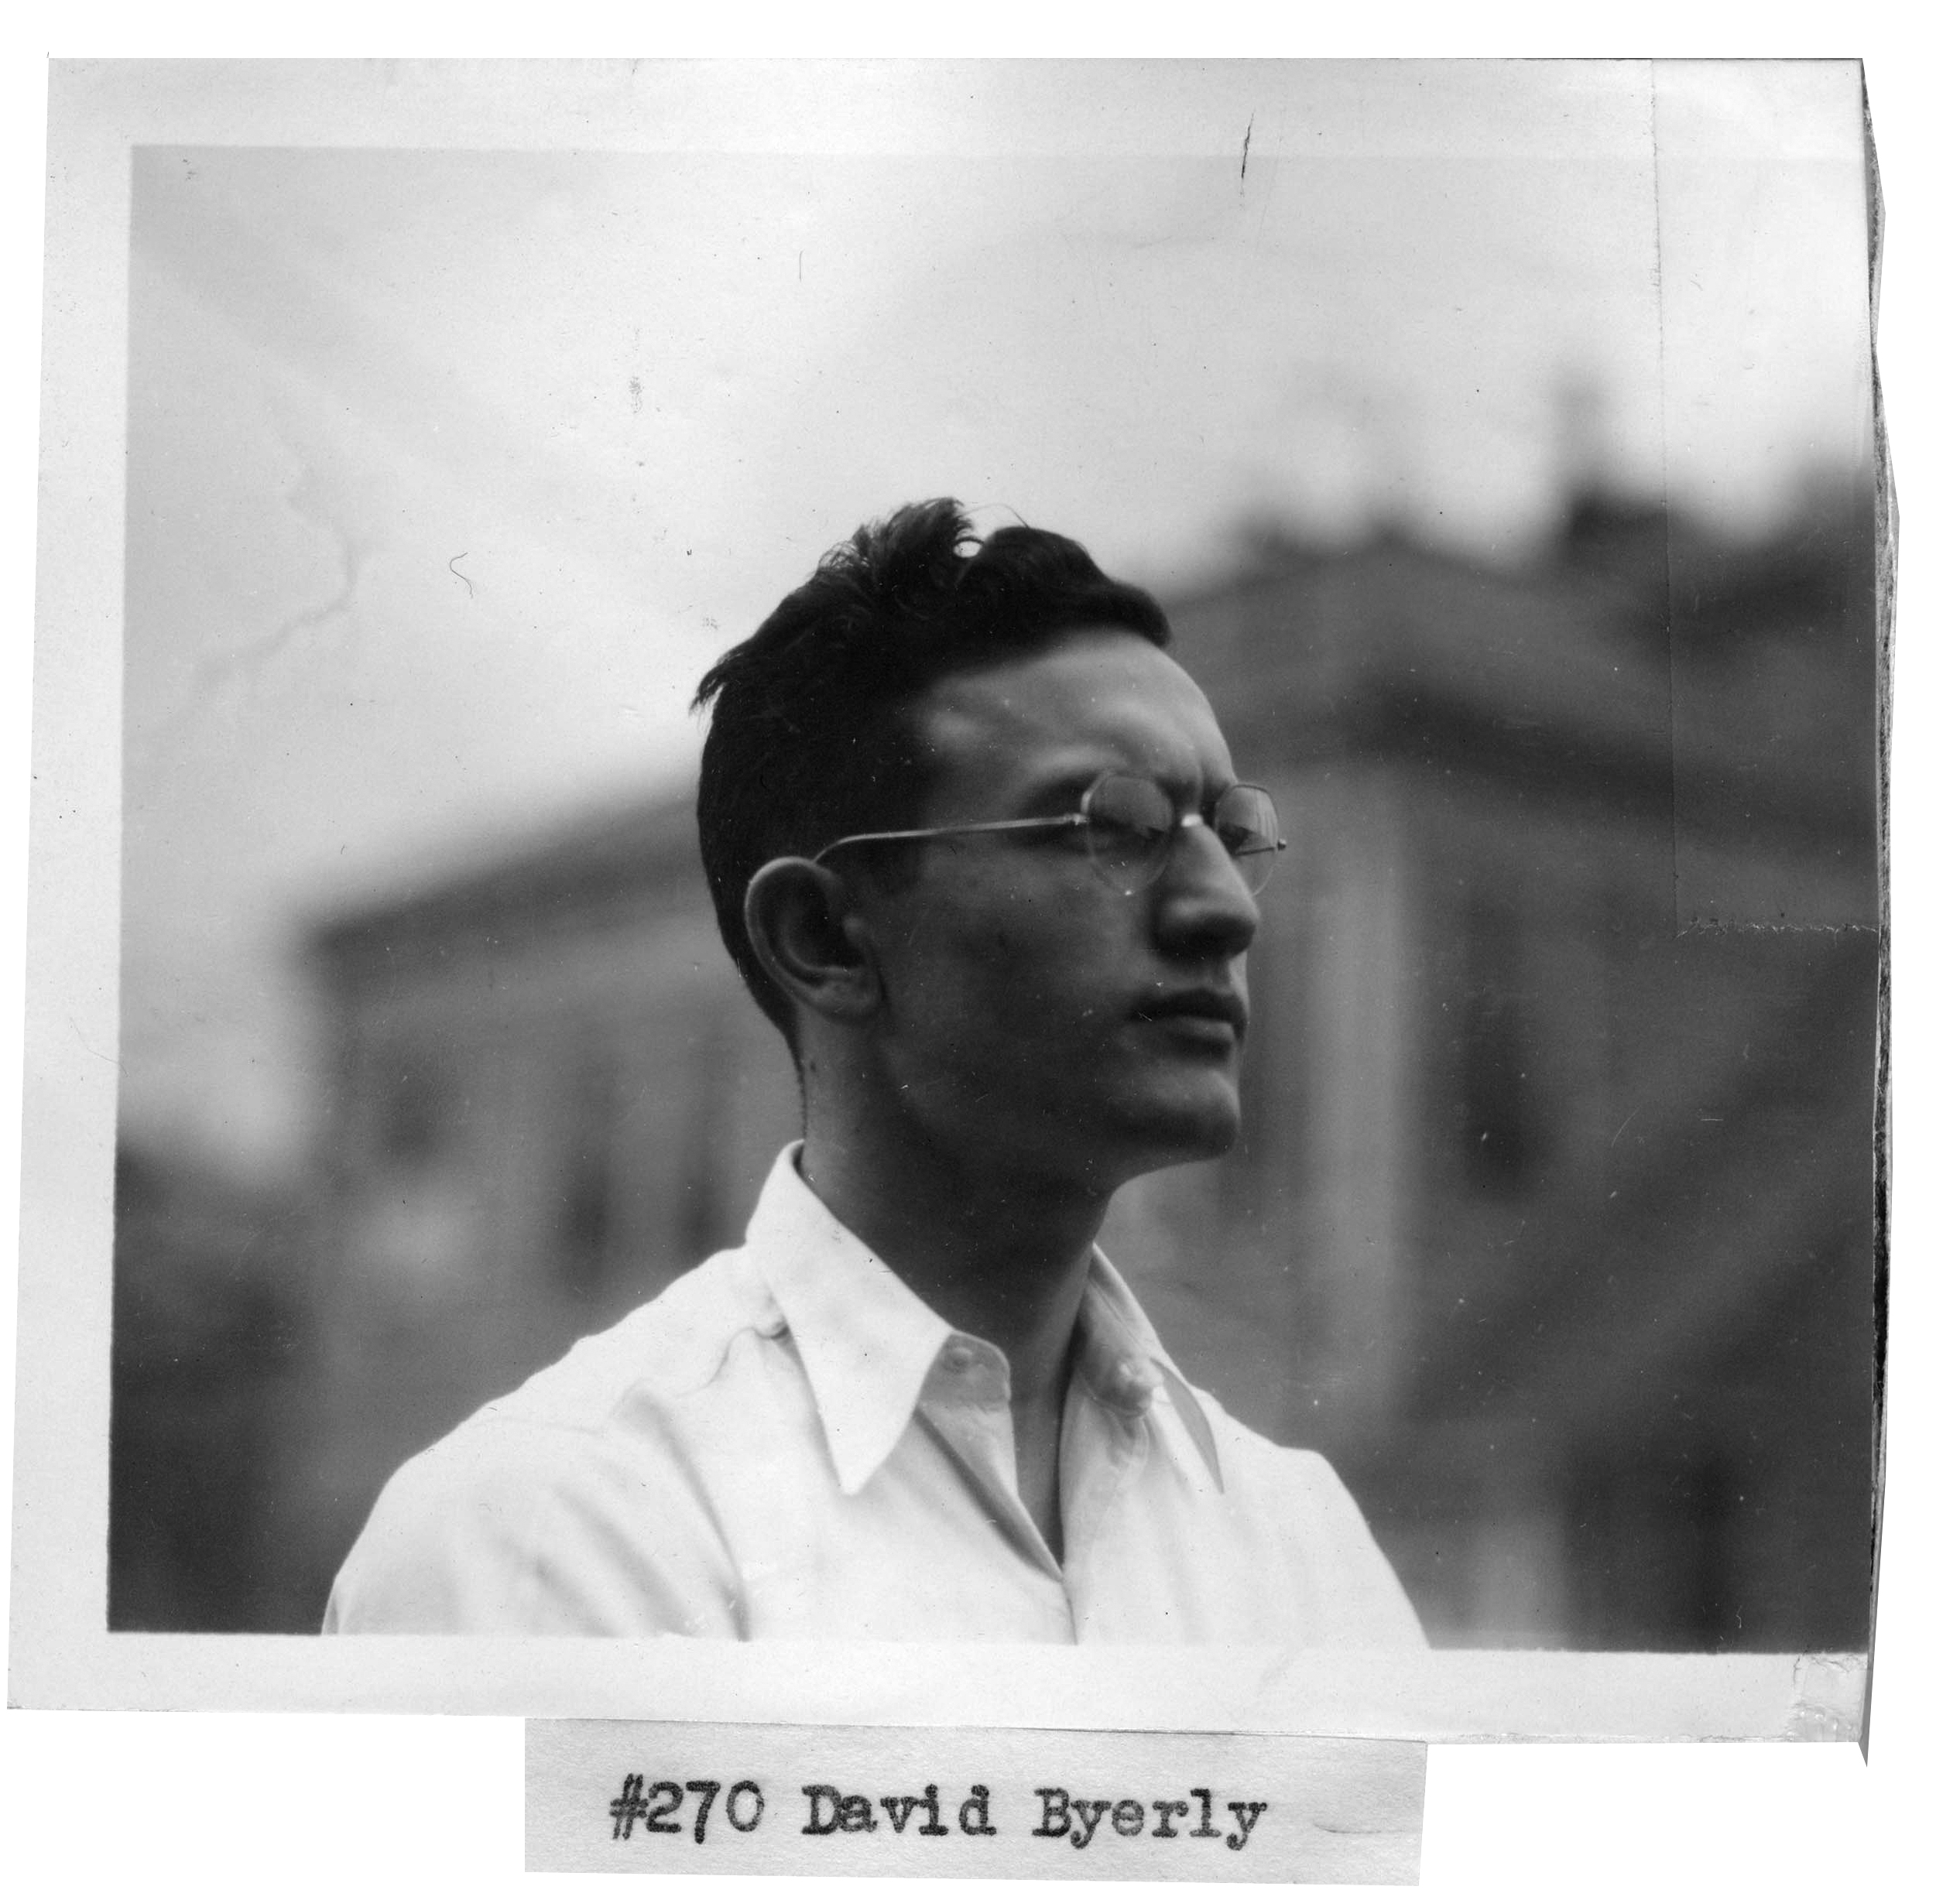 David Byerly, P&G researcher who led development of synthetic detergents, including Tide. 